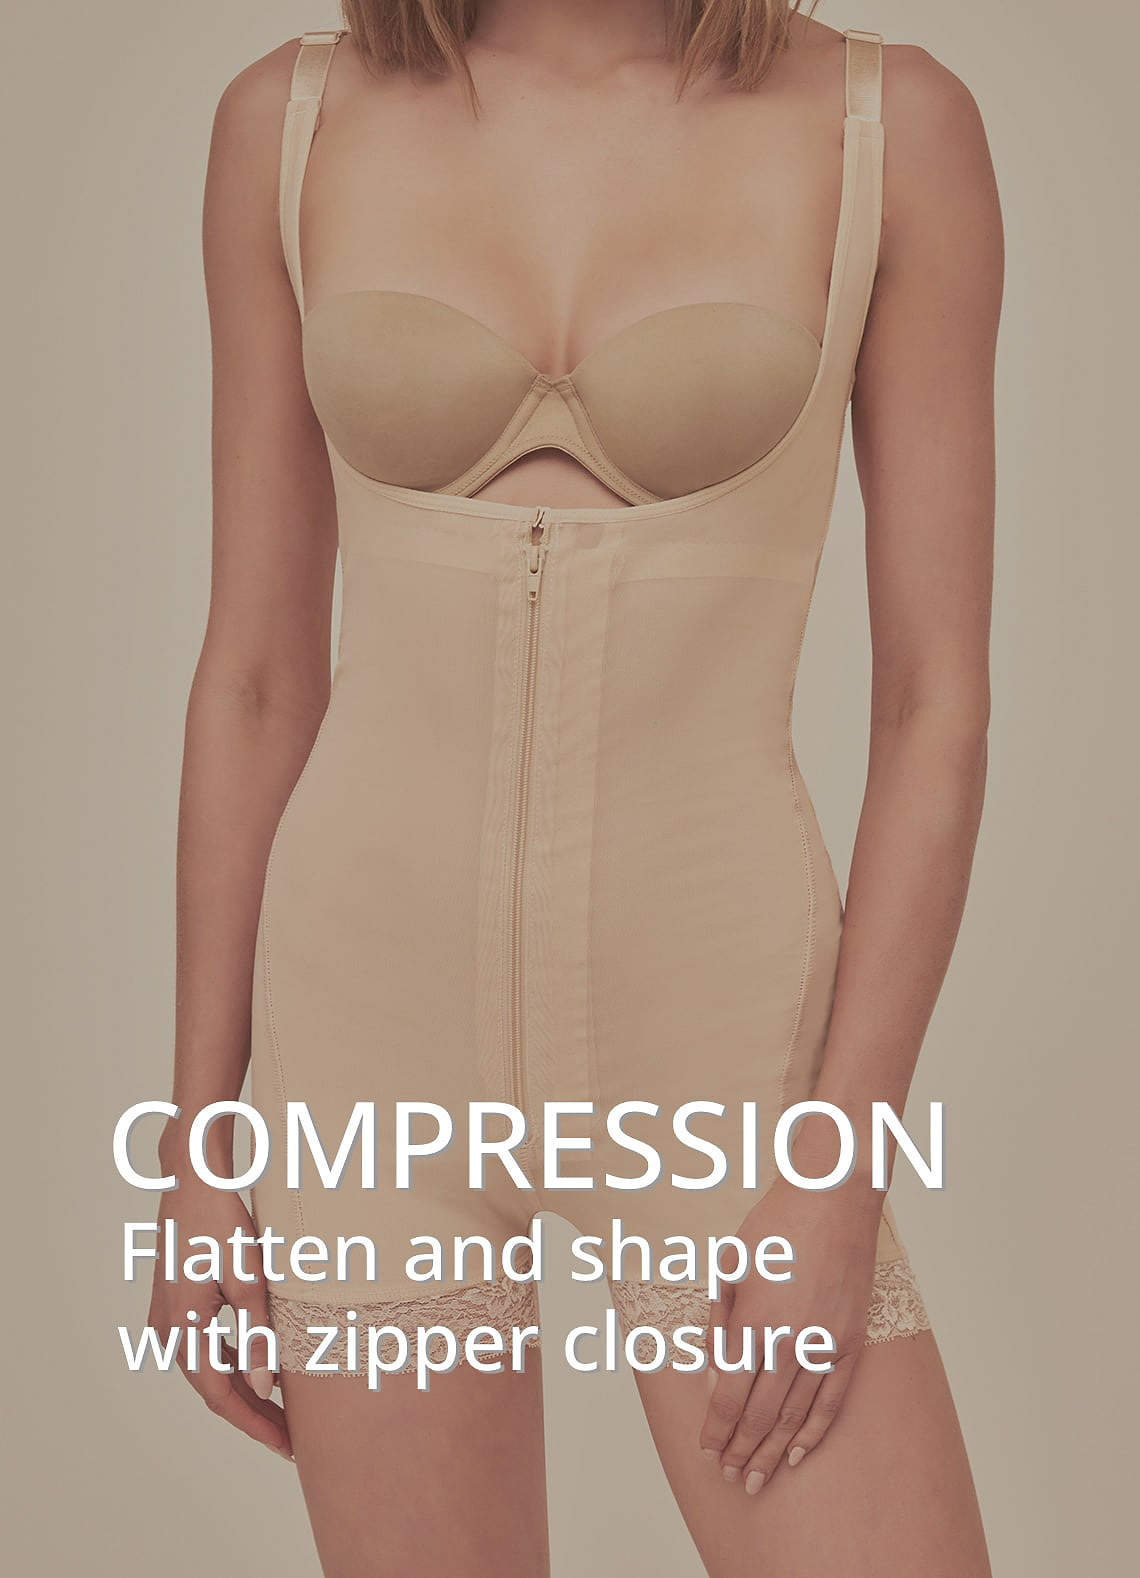 front Mid-thigh Underbust Body Shaper